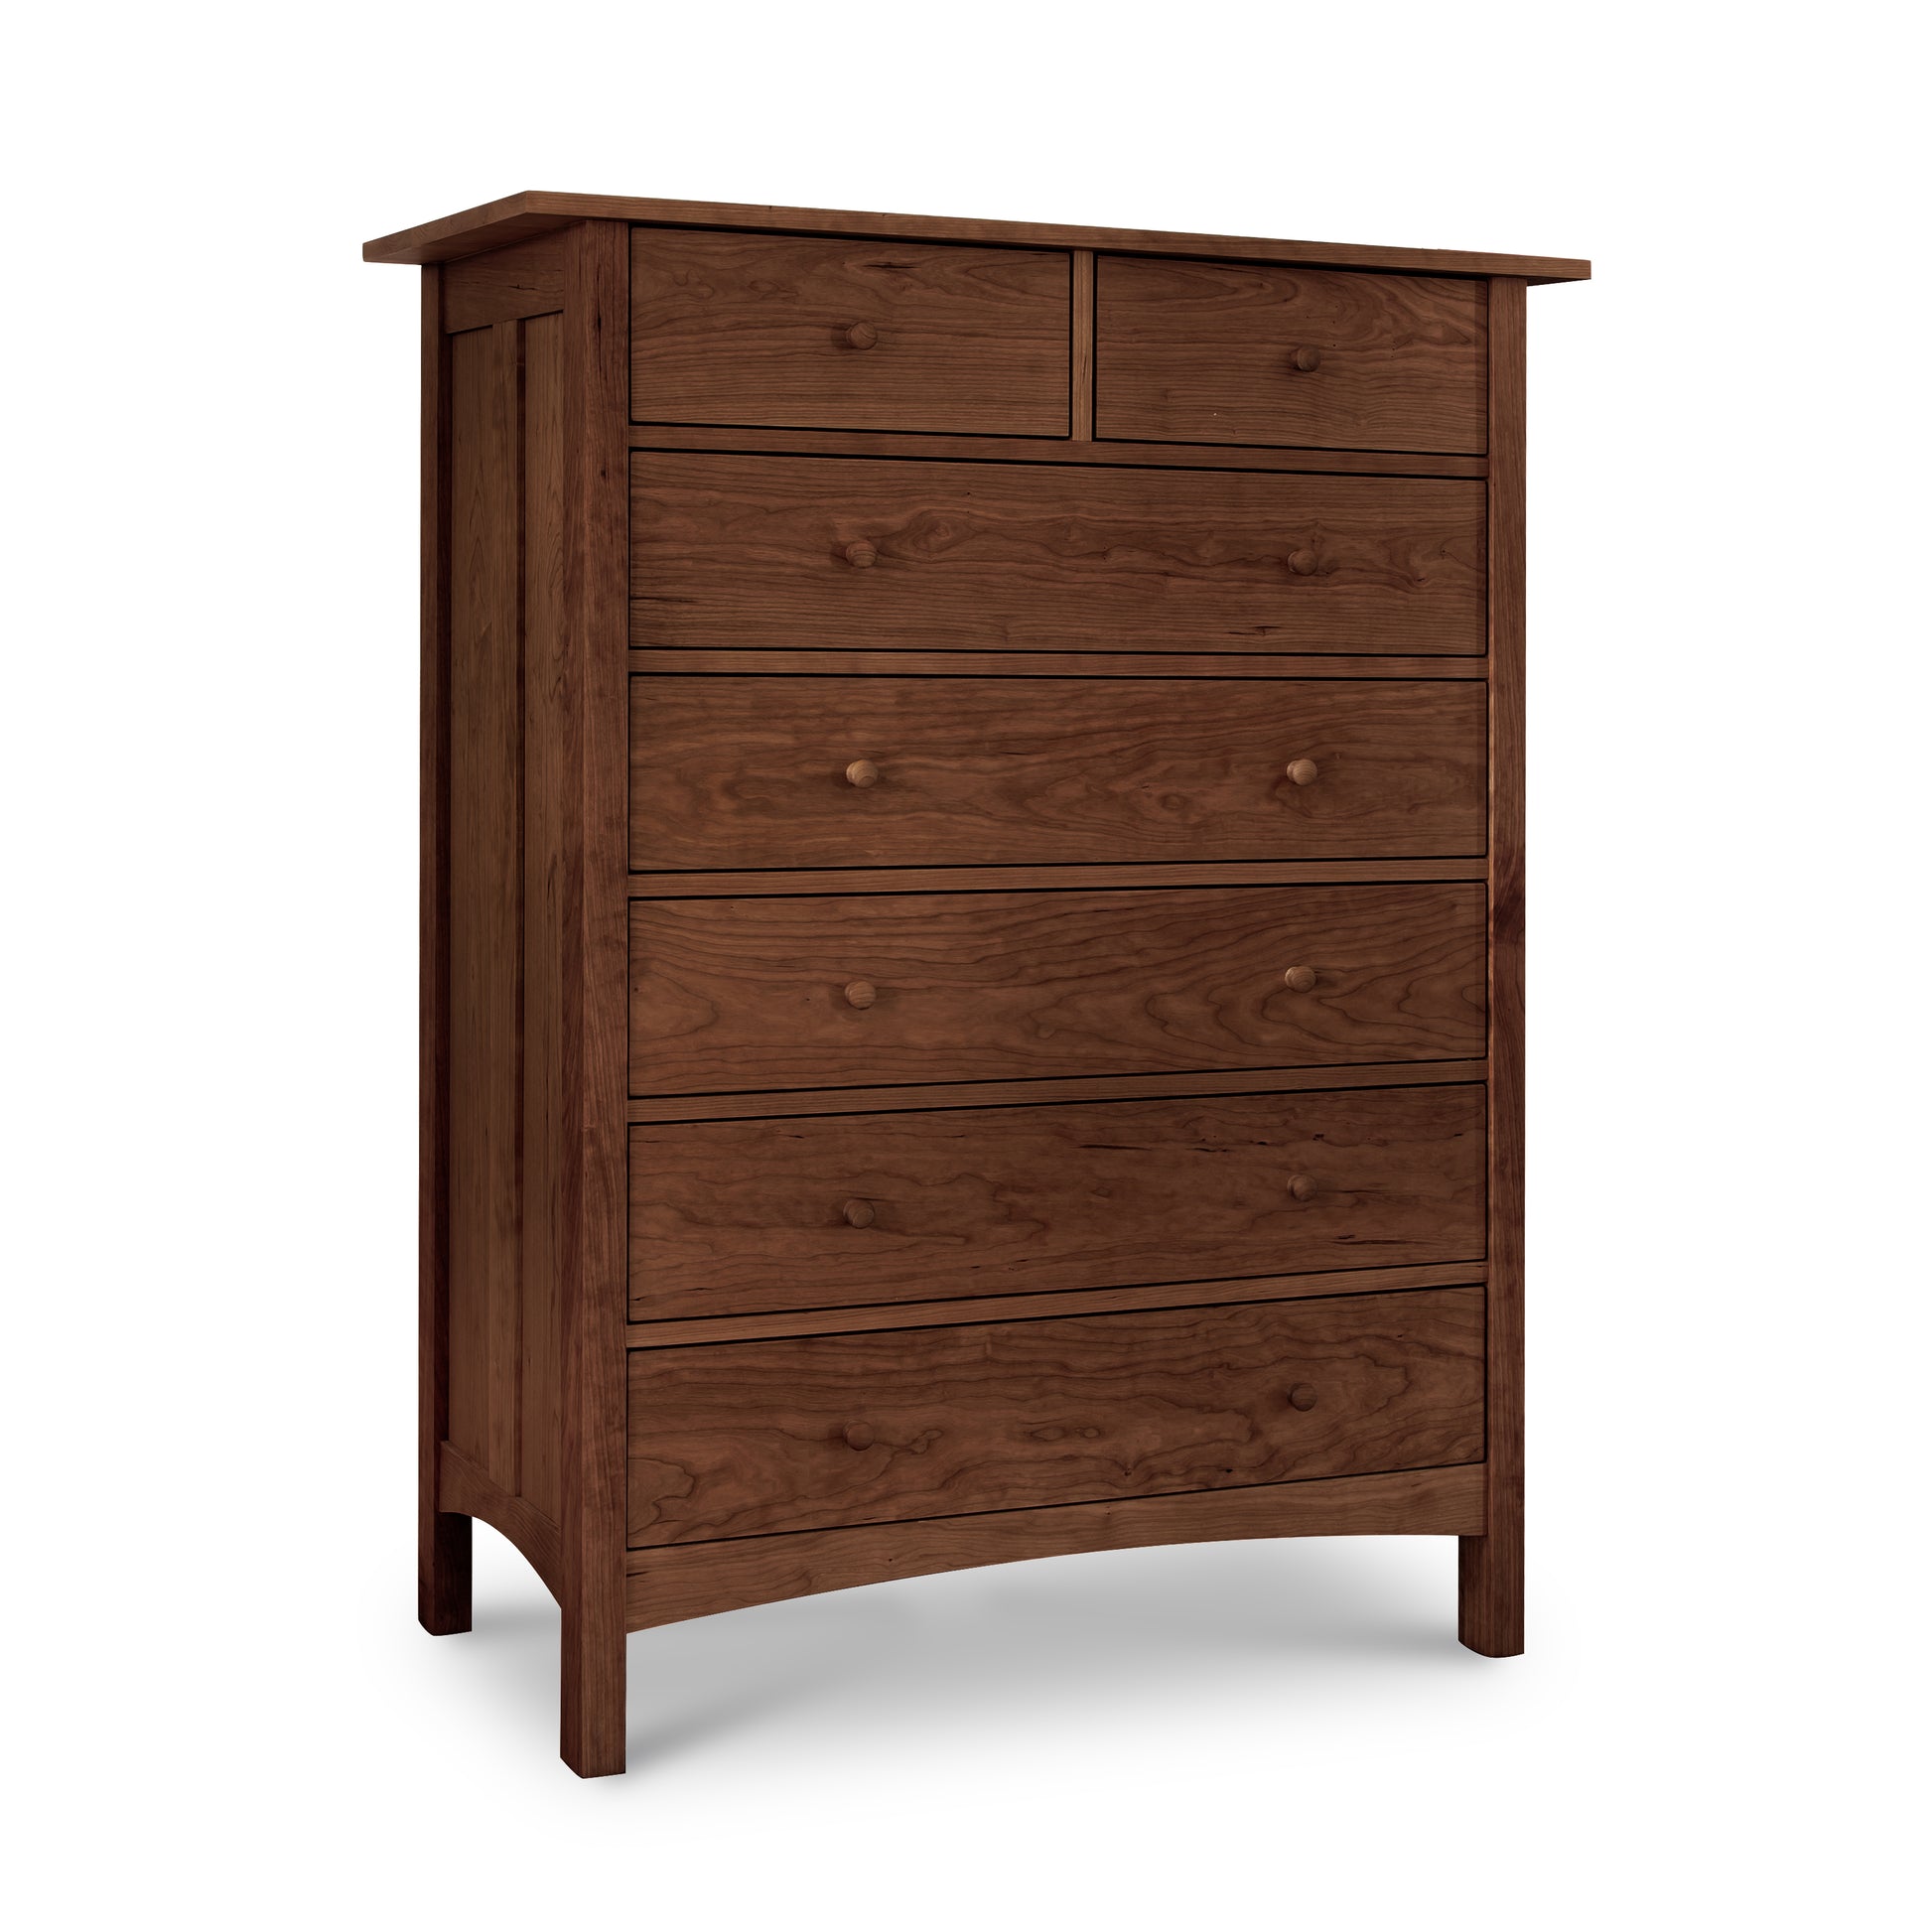 An image of a Burlington Shaker 7-Drawer Chest by Vermont Furniture Designs, made of solid wood.